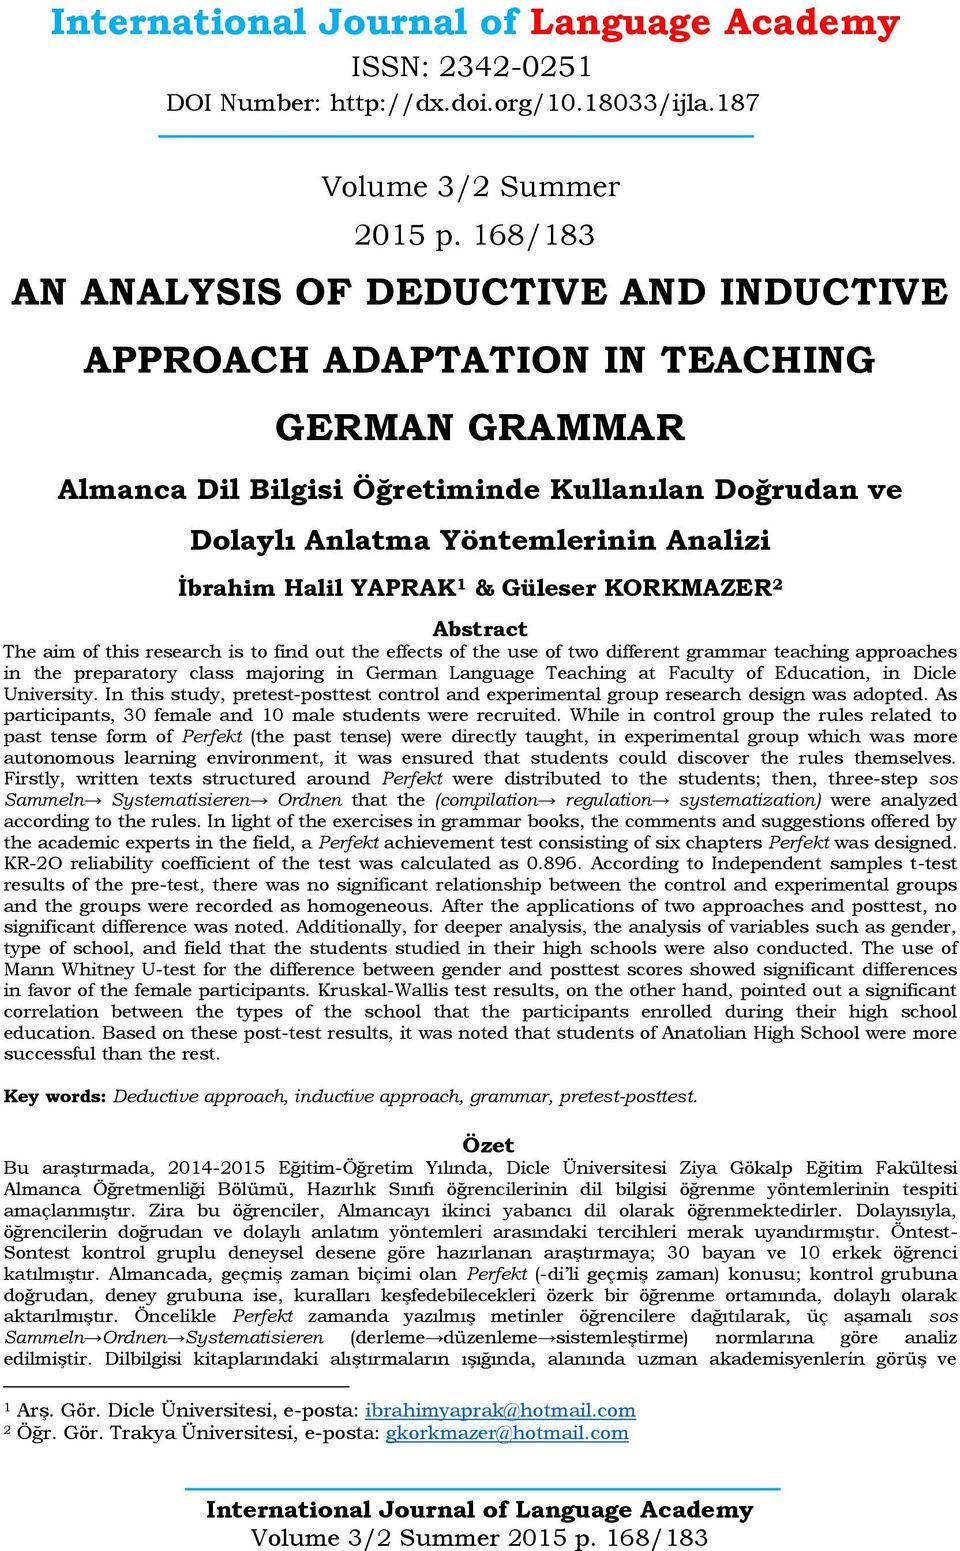 Halil YAPRAK 1 & Güleser KORKMAZER 2 Abstract The aim of this research is to find out the effects of the use of two different grammar teaching approaches in the preparatory class majoring in German